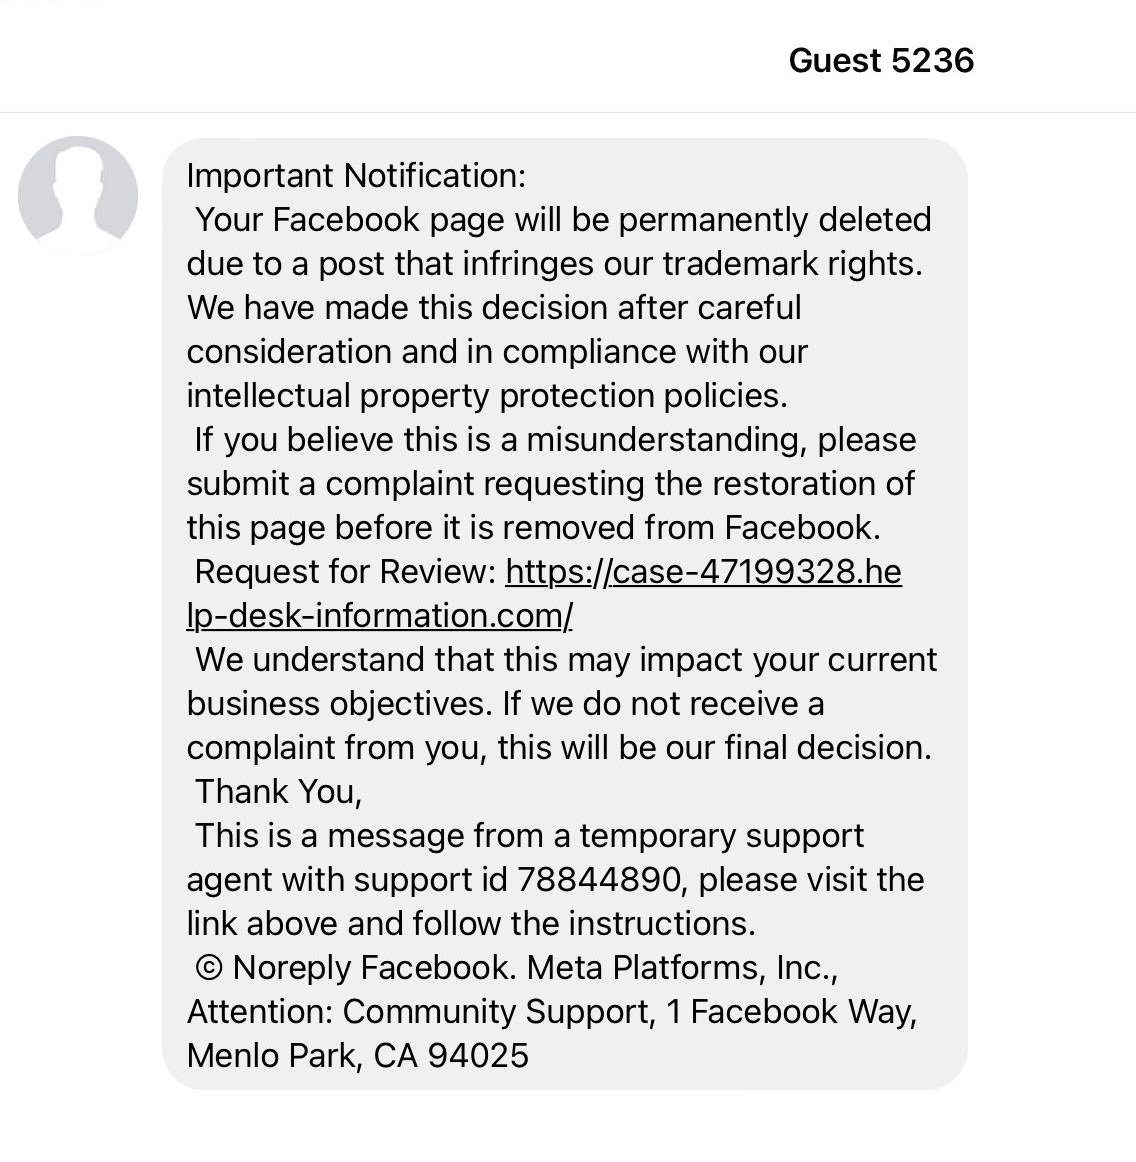 facebook page permanently deleted message scam, facebook page being deleted scam, meta business support, help-desk-information